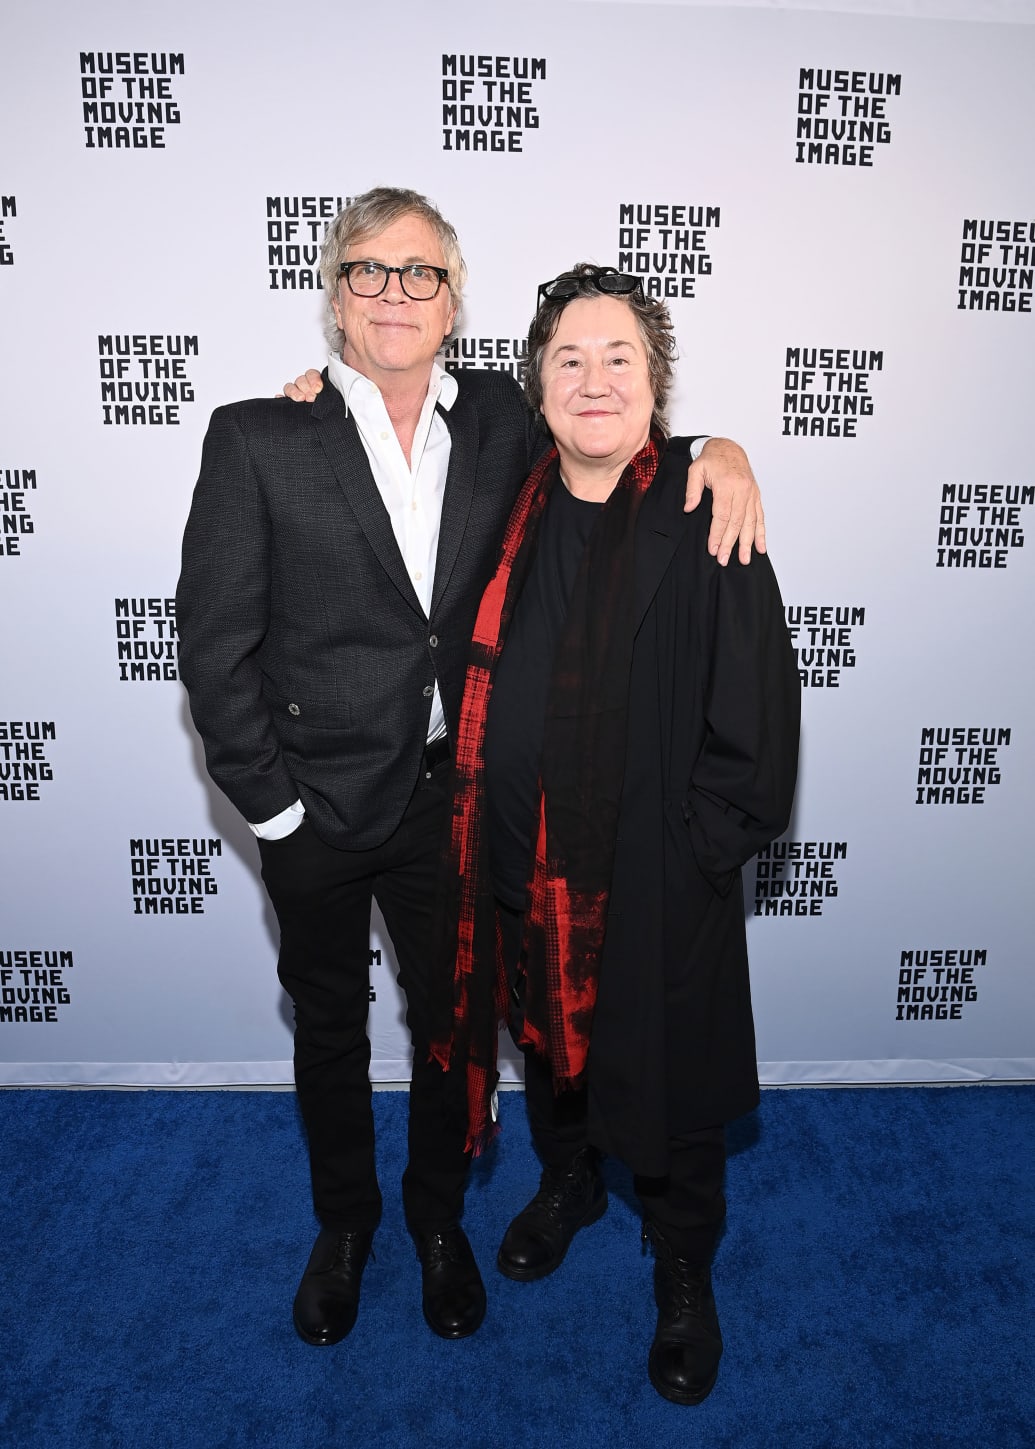 A picture of Todd Haynes and Christine Vachon posing in front of a step and repeat.